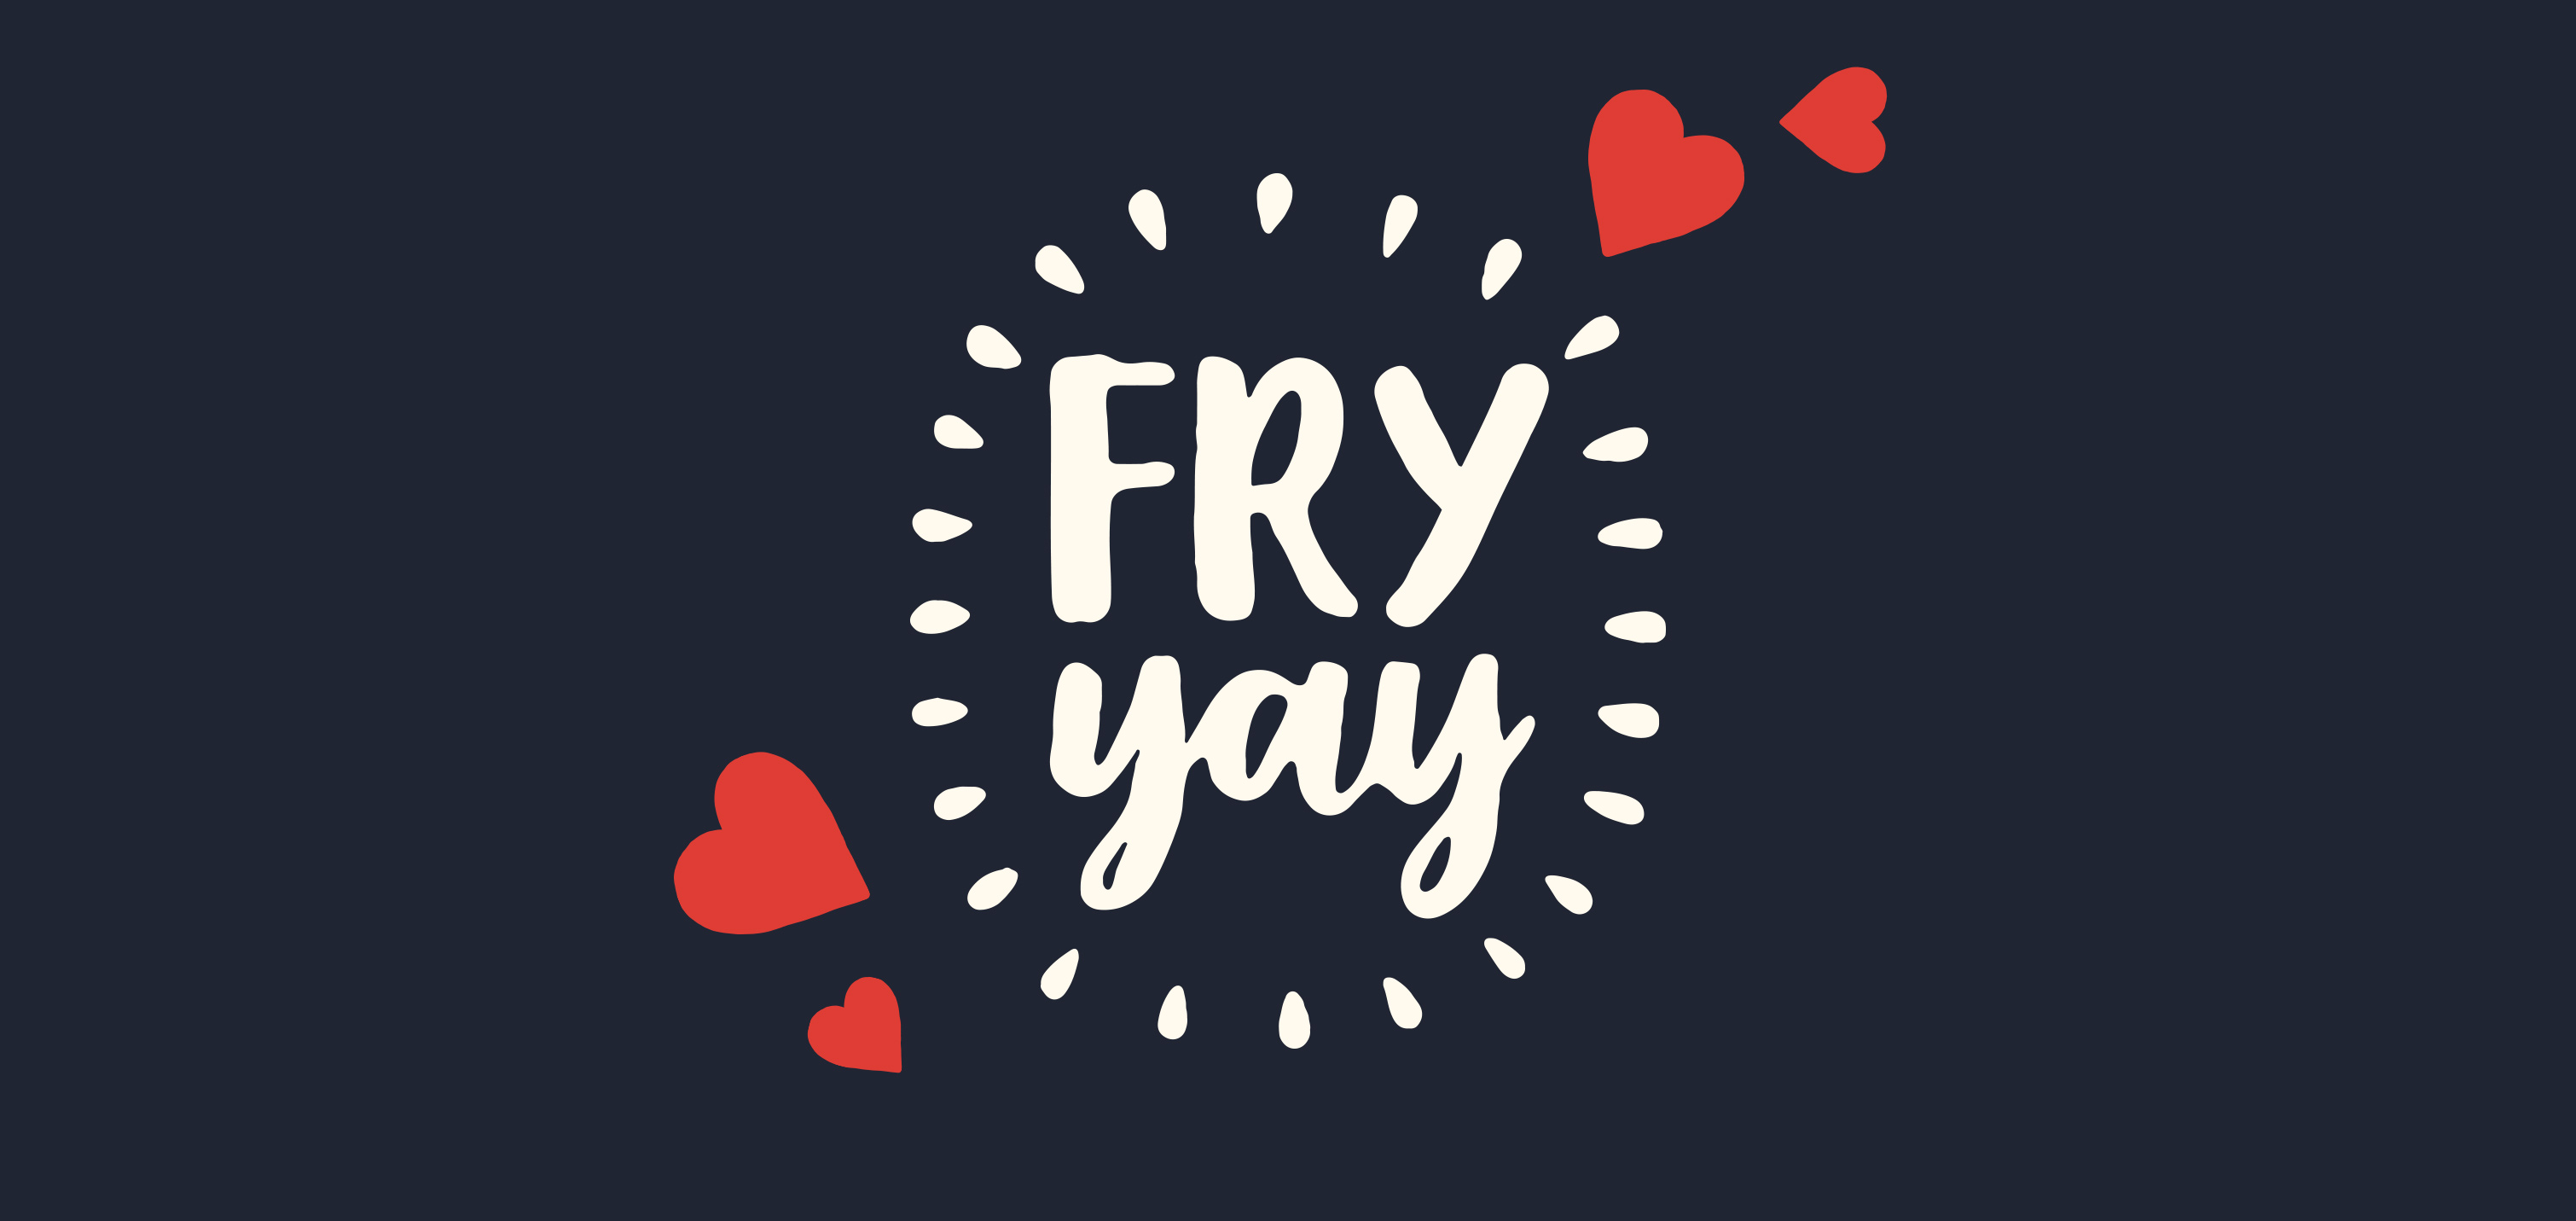 fry-yay august offer